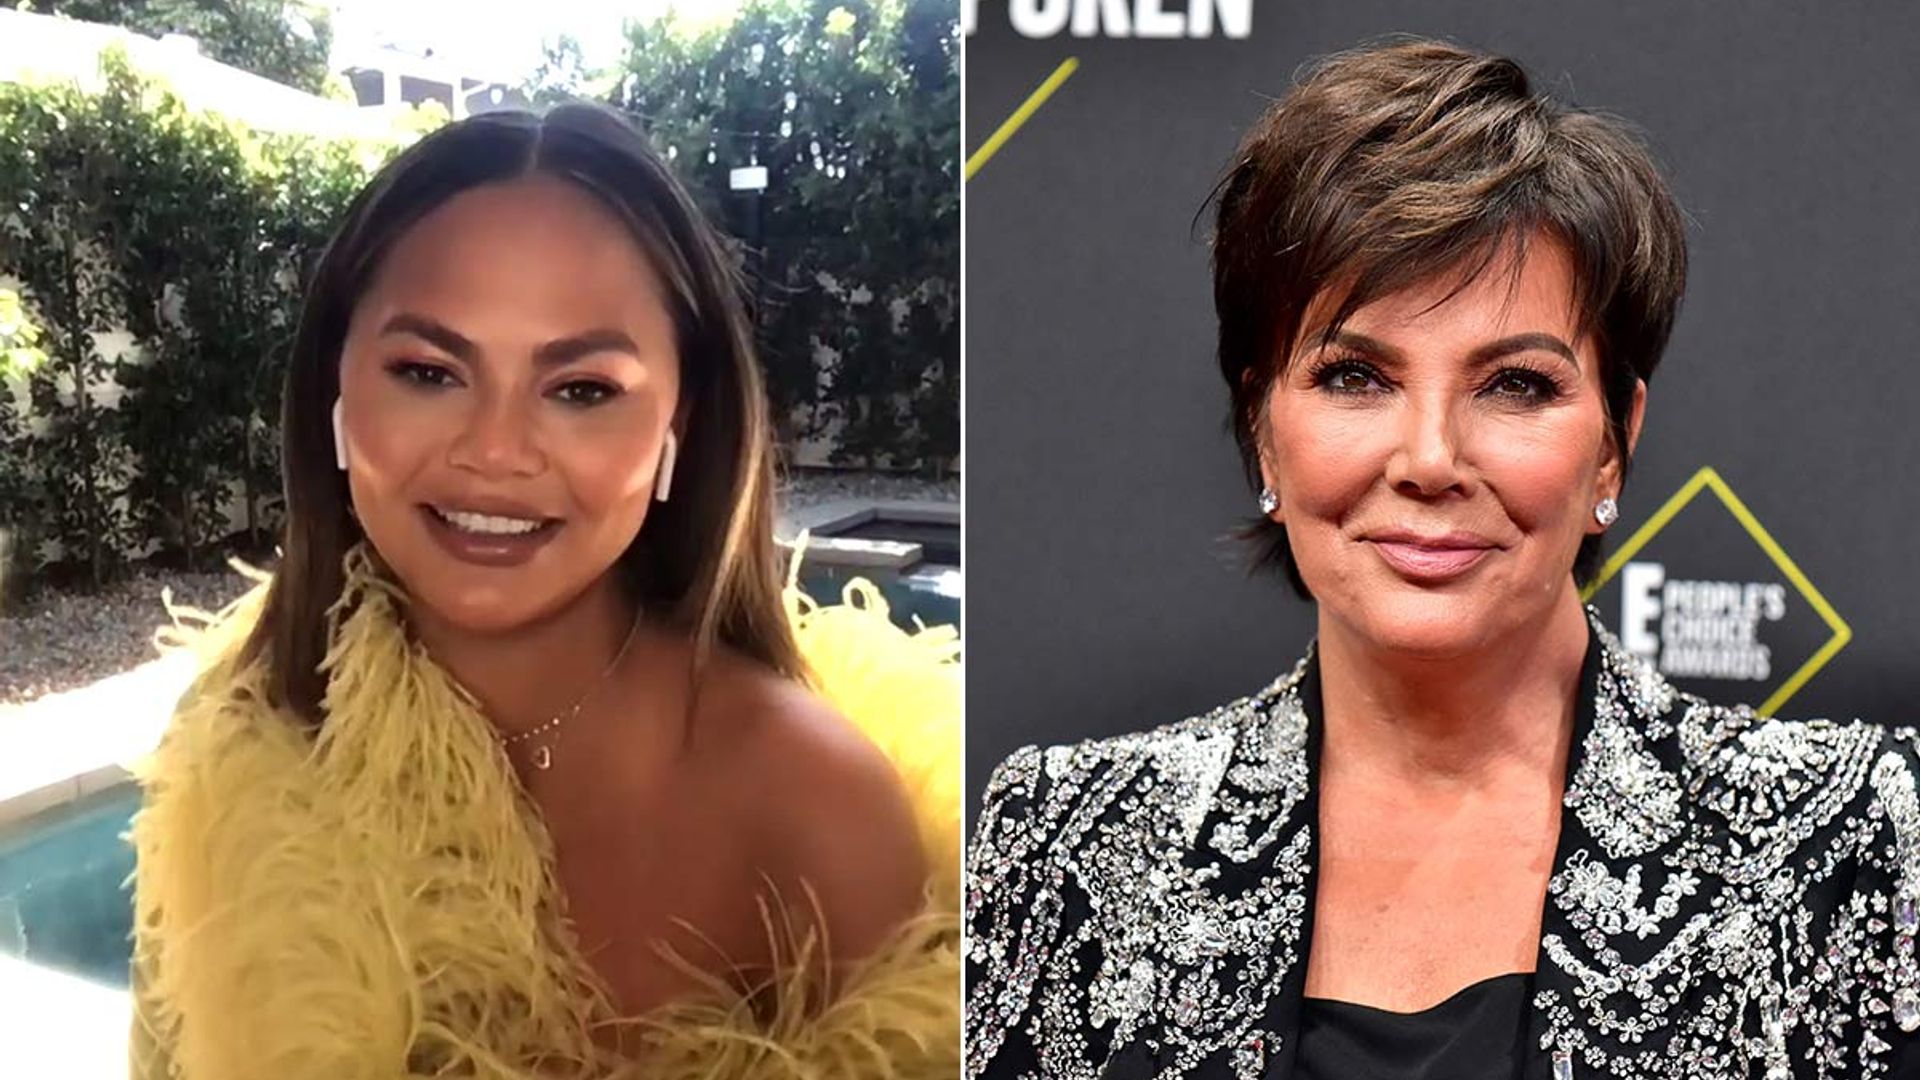 Chrissy Teigen and Kris Jenner divide fans with controversial video - watch